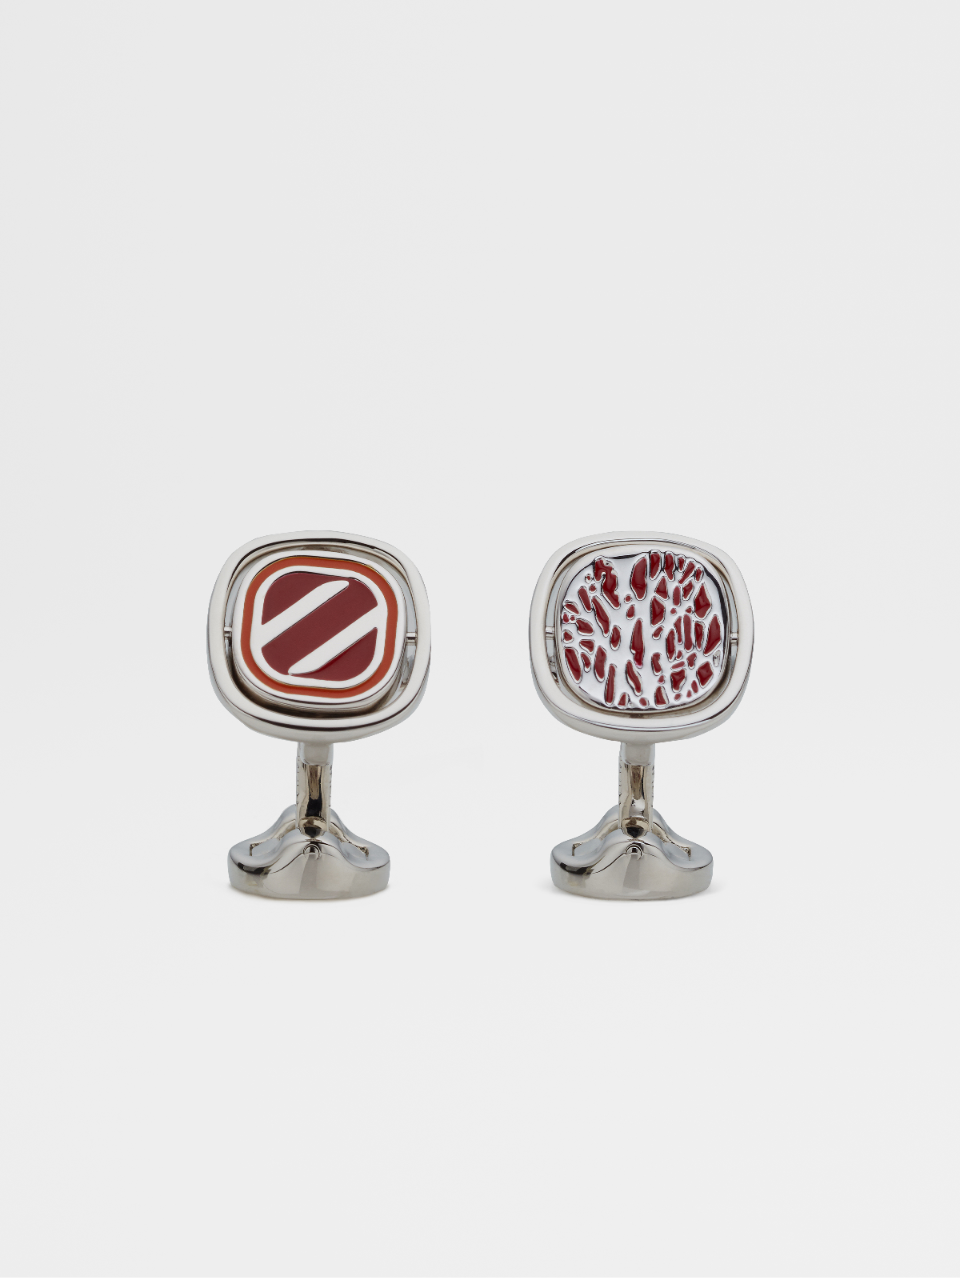 Back to Nature Metal Cufflinks